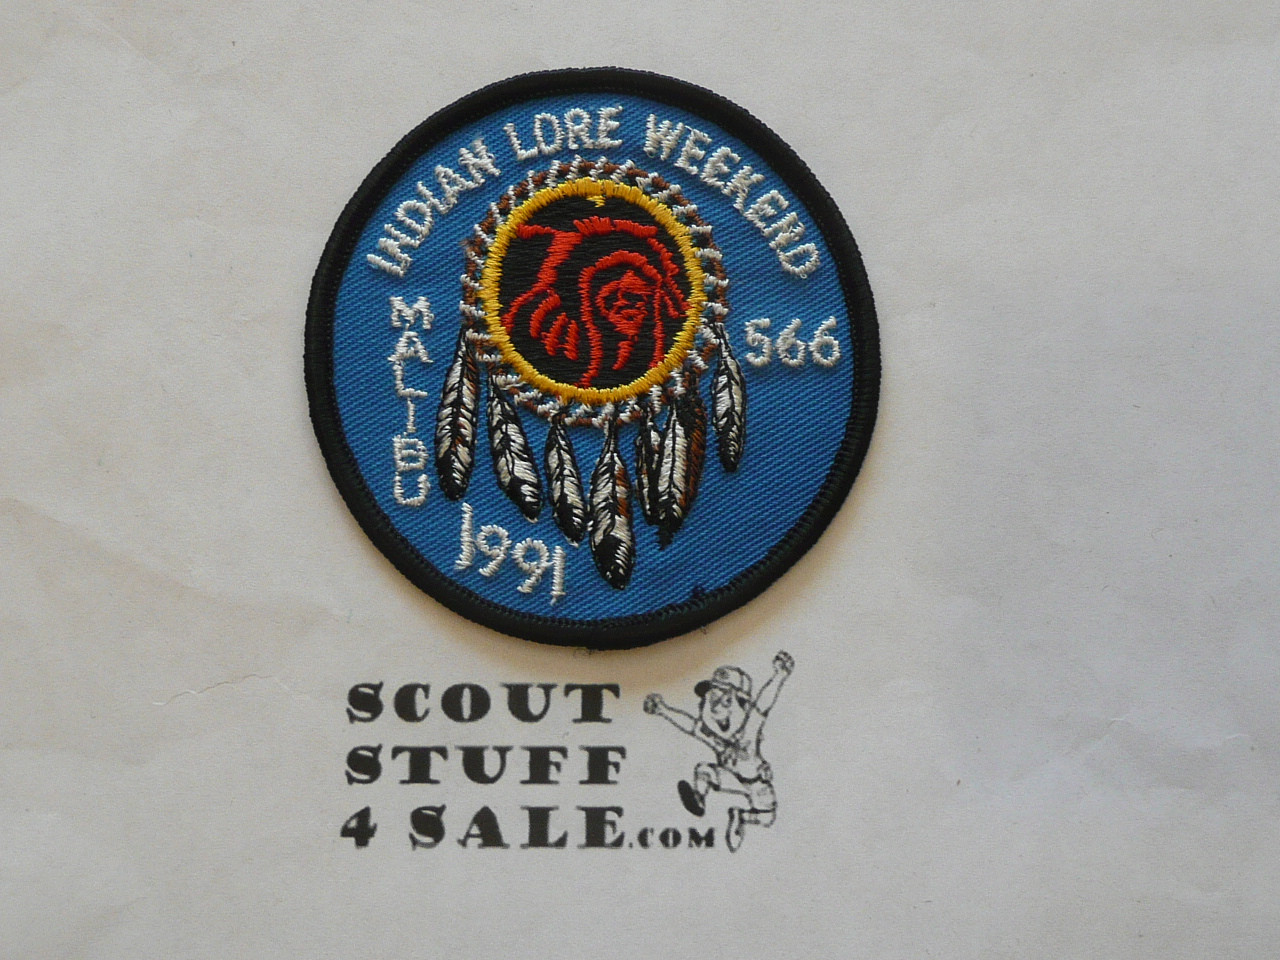 Order of the Arrow Lodge #566 Malibu 1991 Indian Lore Weekend Patch - Scout